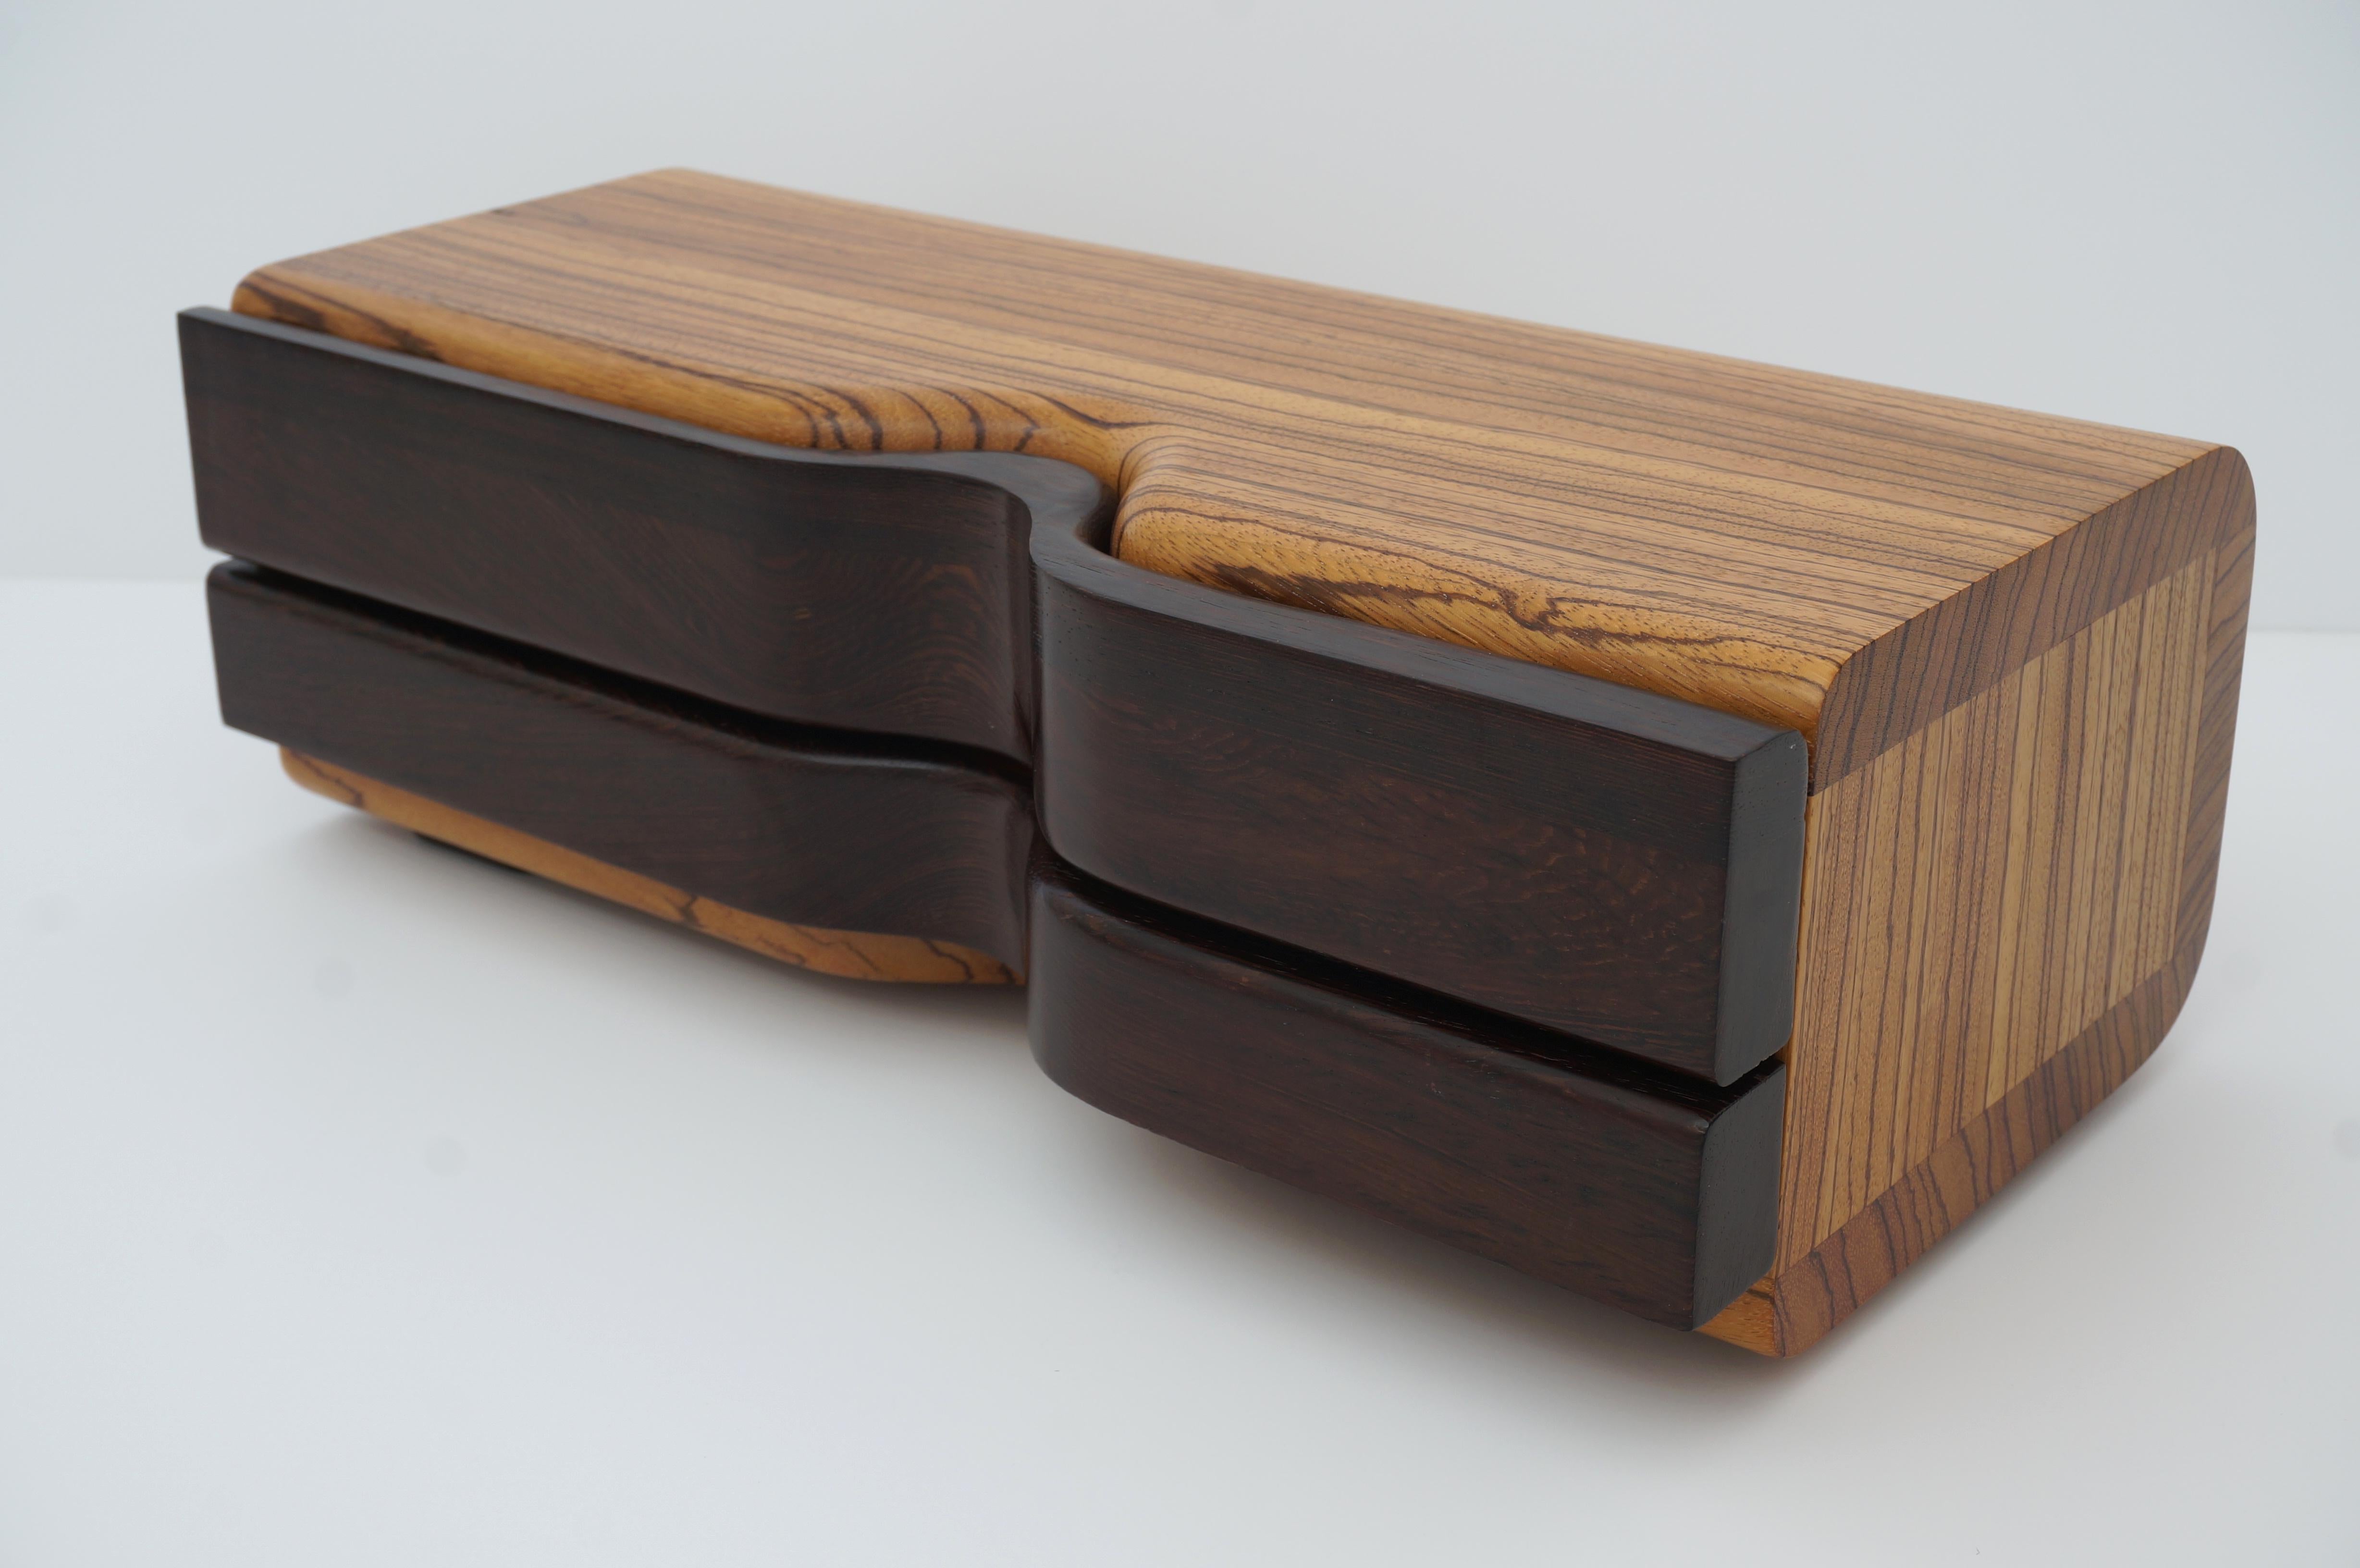 This stylish and chic artisan jewelry box will make a beautiful addition to your dressing table. The piece is created using an exotic mix of solid woods to create a visually intoxicating form and finish.